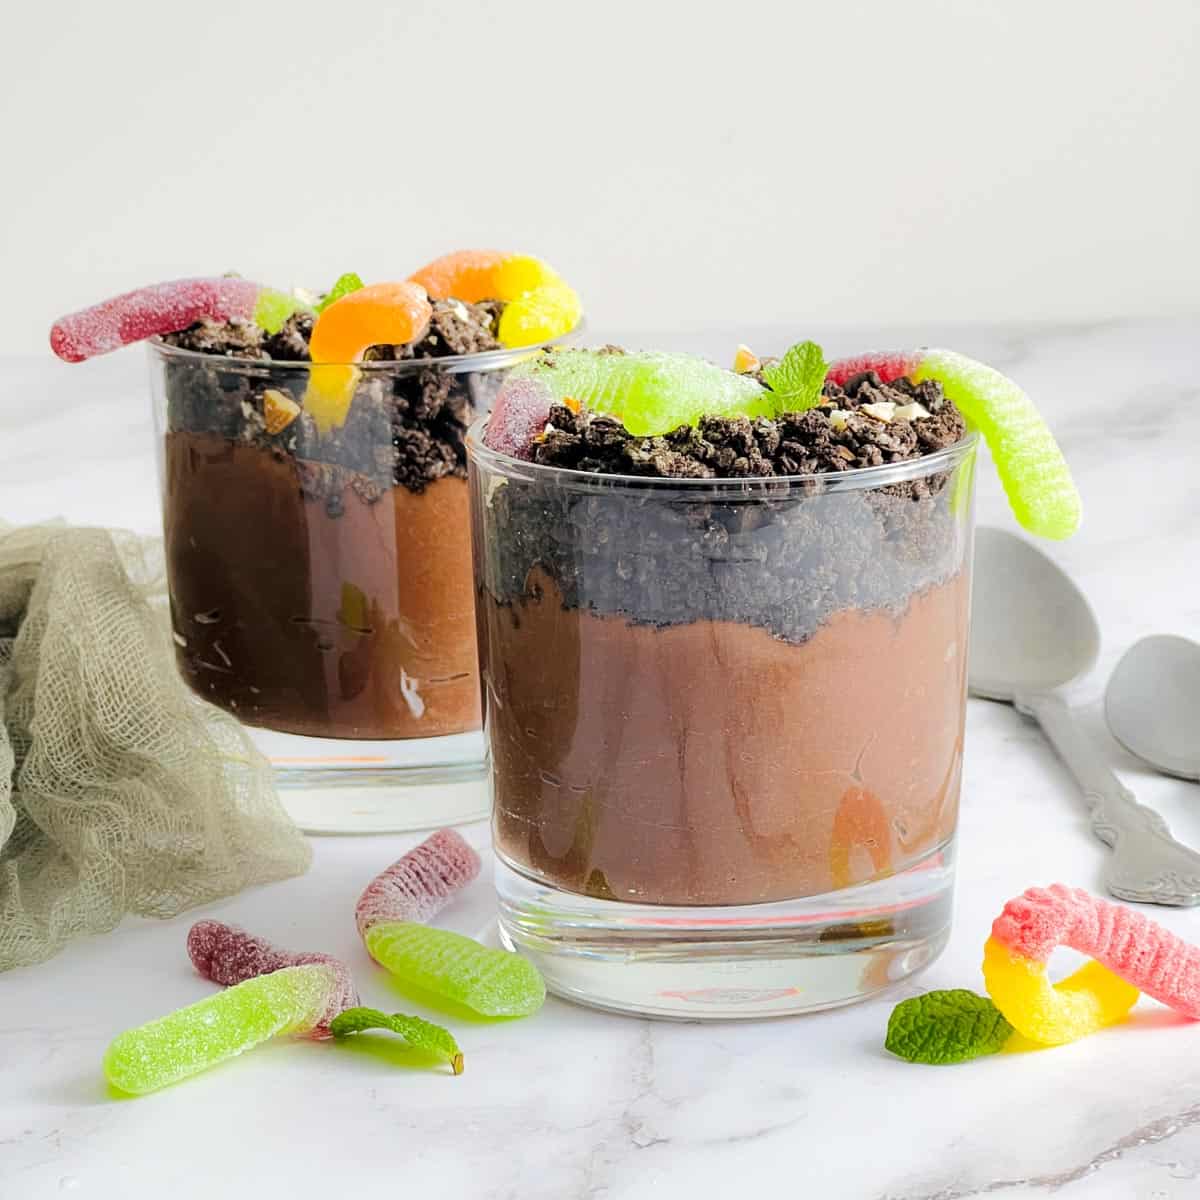 Chocolate dirt pudding with gummy worms and spoons in the background.